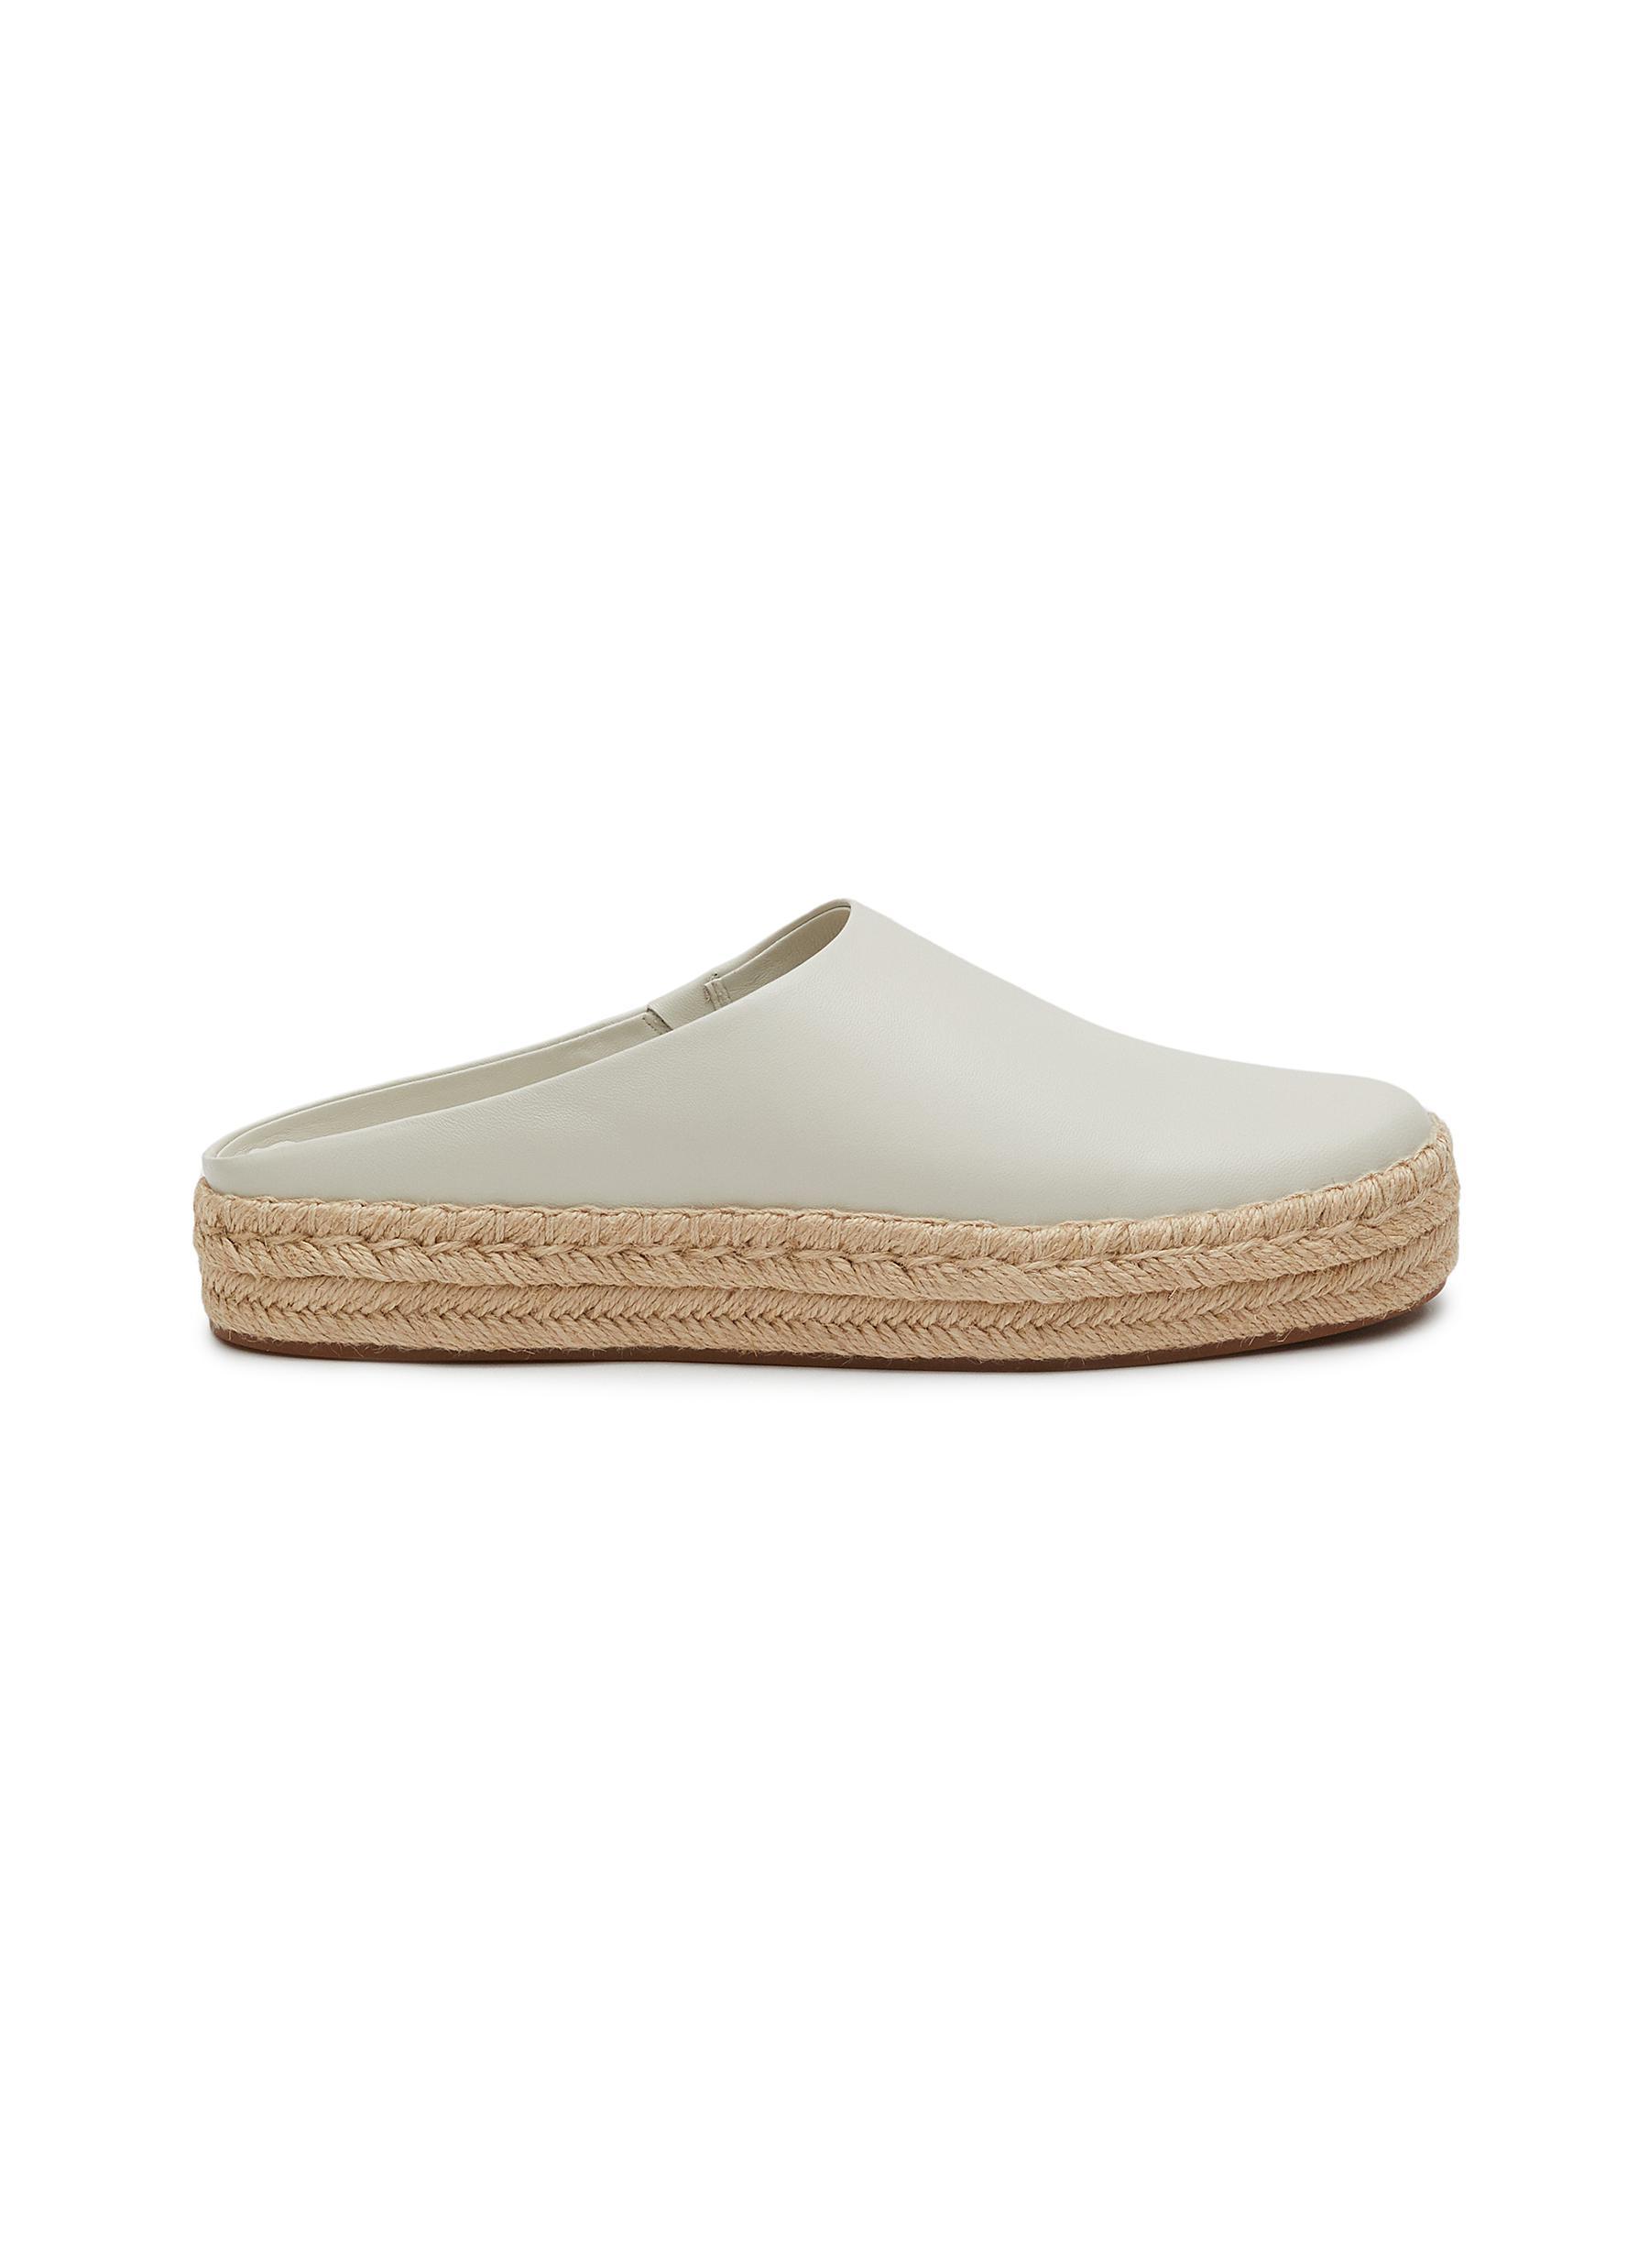 Vince 'ulla' Platform Leather Espadrille Mules in White | Lyst